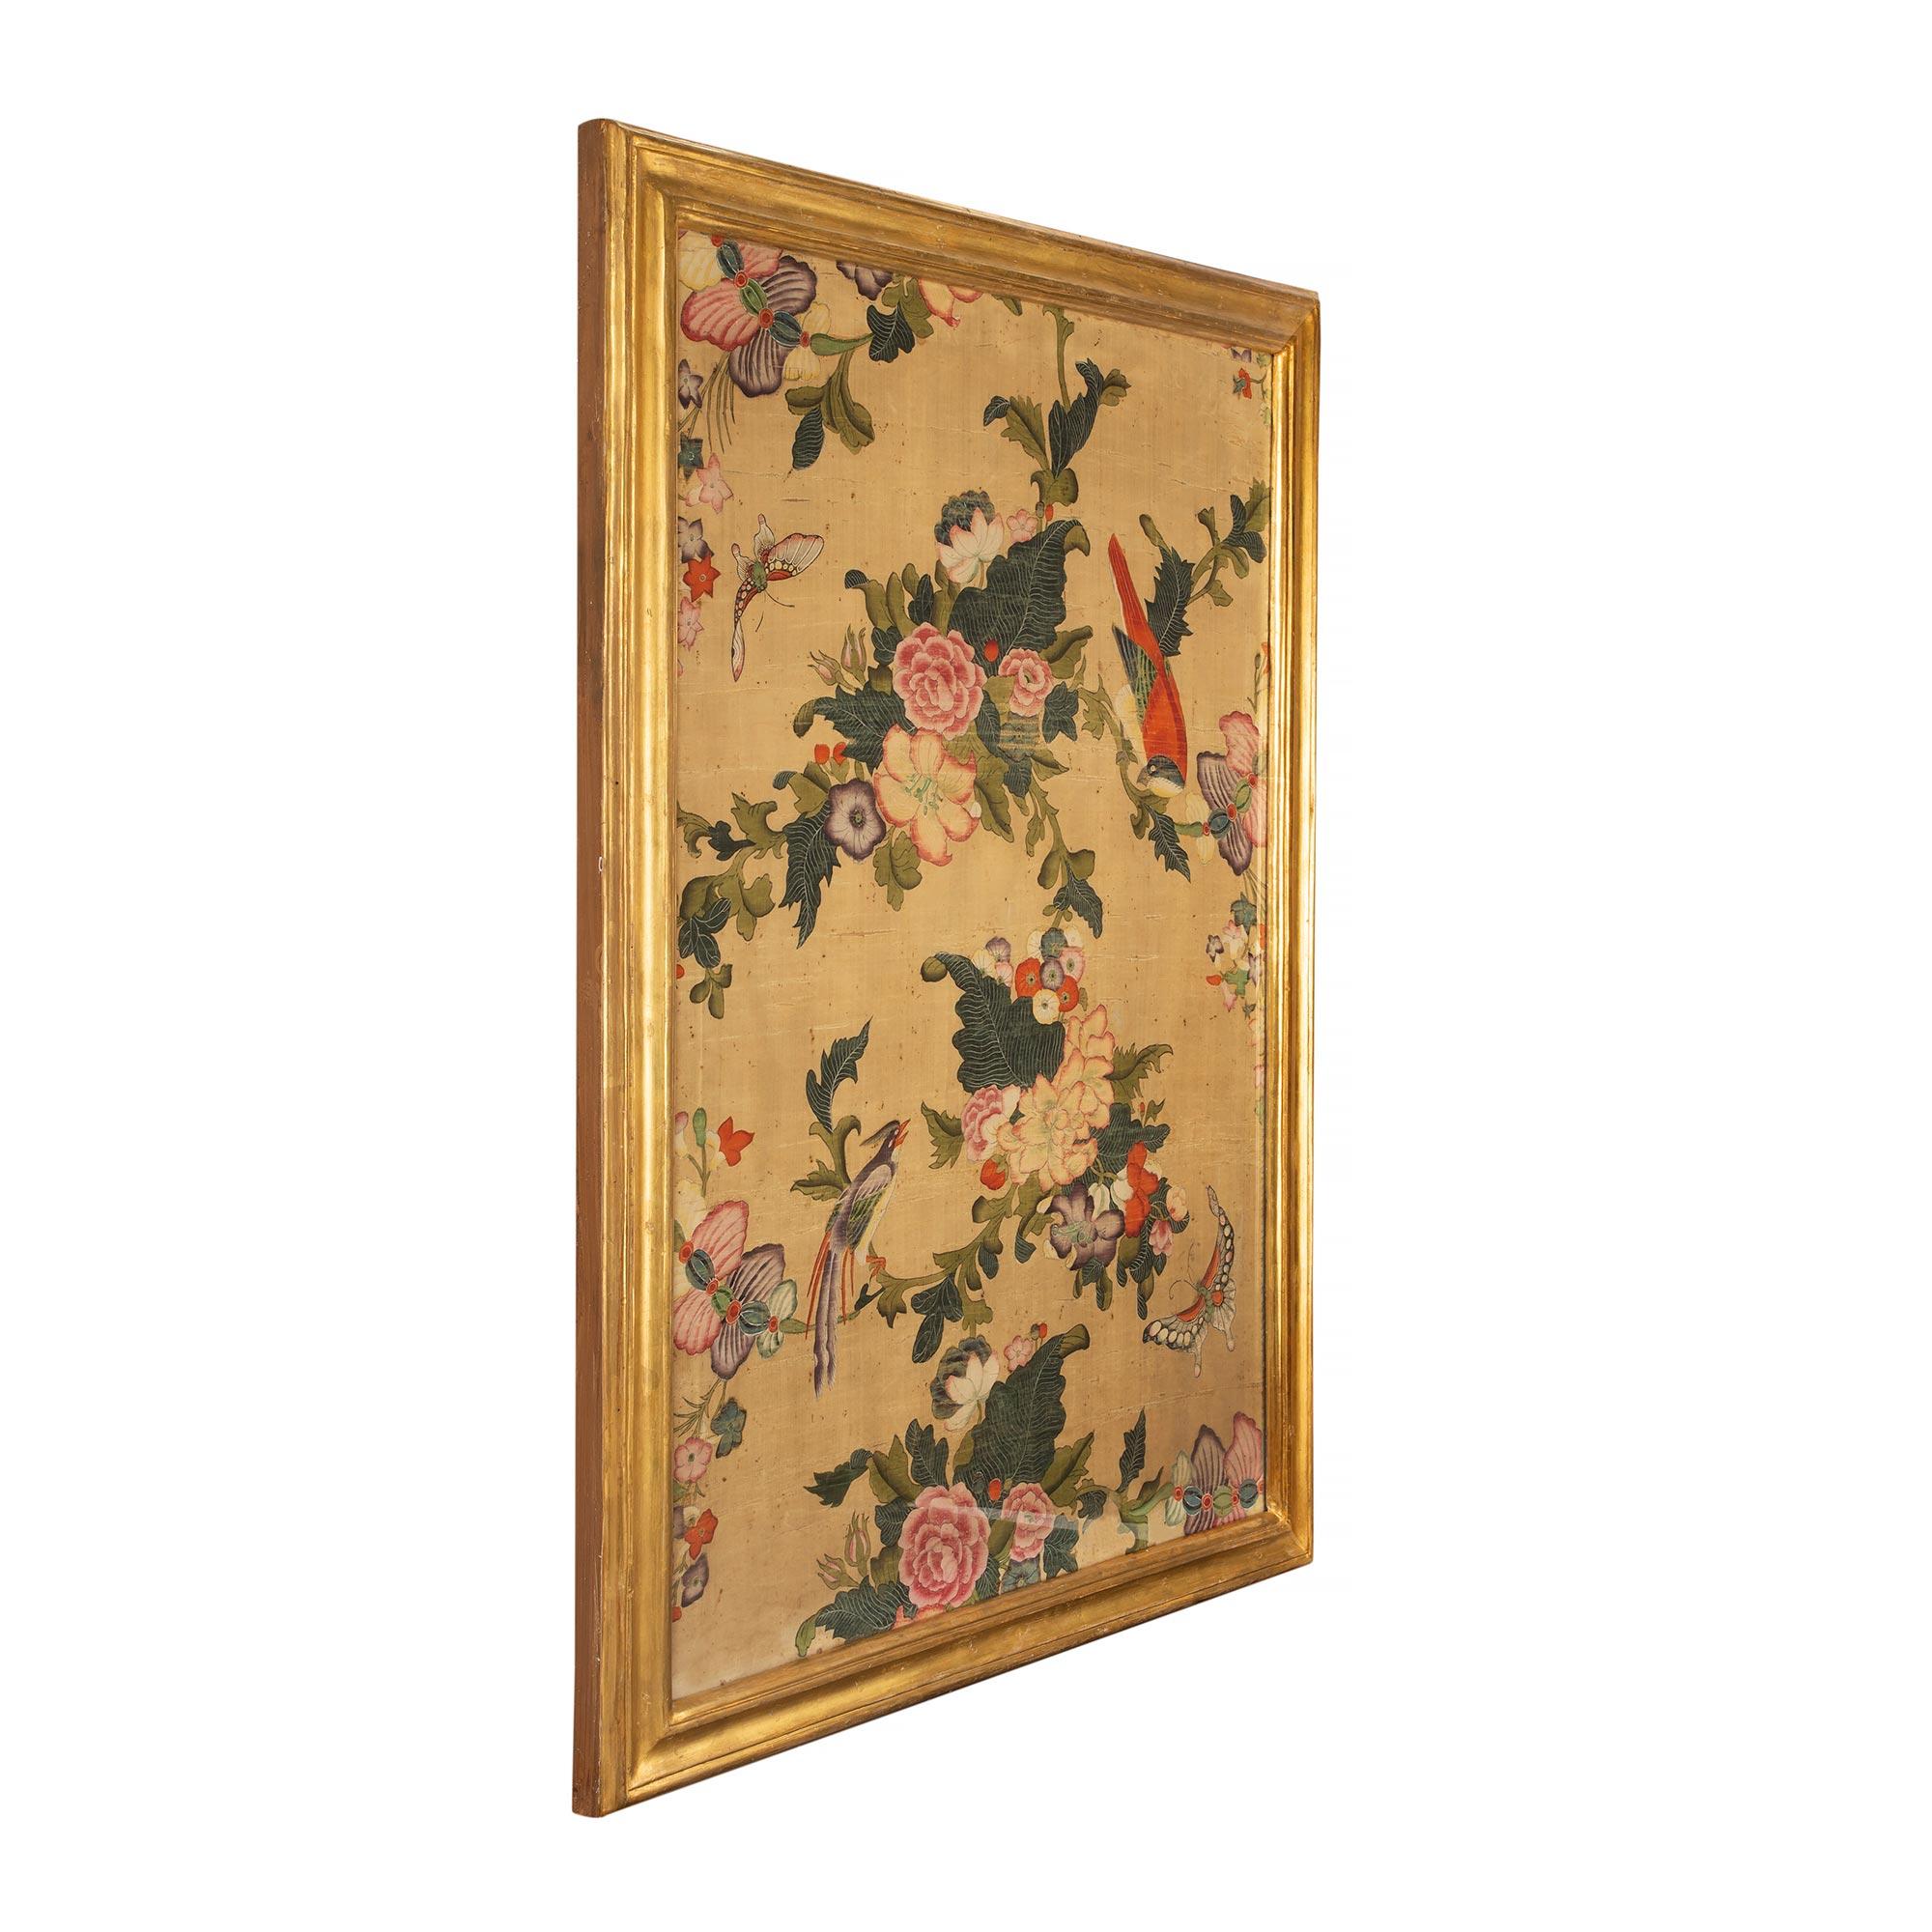 A fine and most elegant pair of 18th century panels of hand painted Asian silk of colorful branches filled with exotic flowers amidst birds and butterflies. The panels are framed within Italian 18th century rectangular mottled frames from the